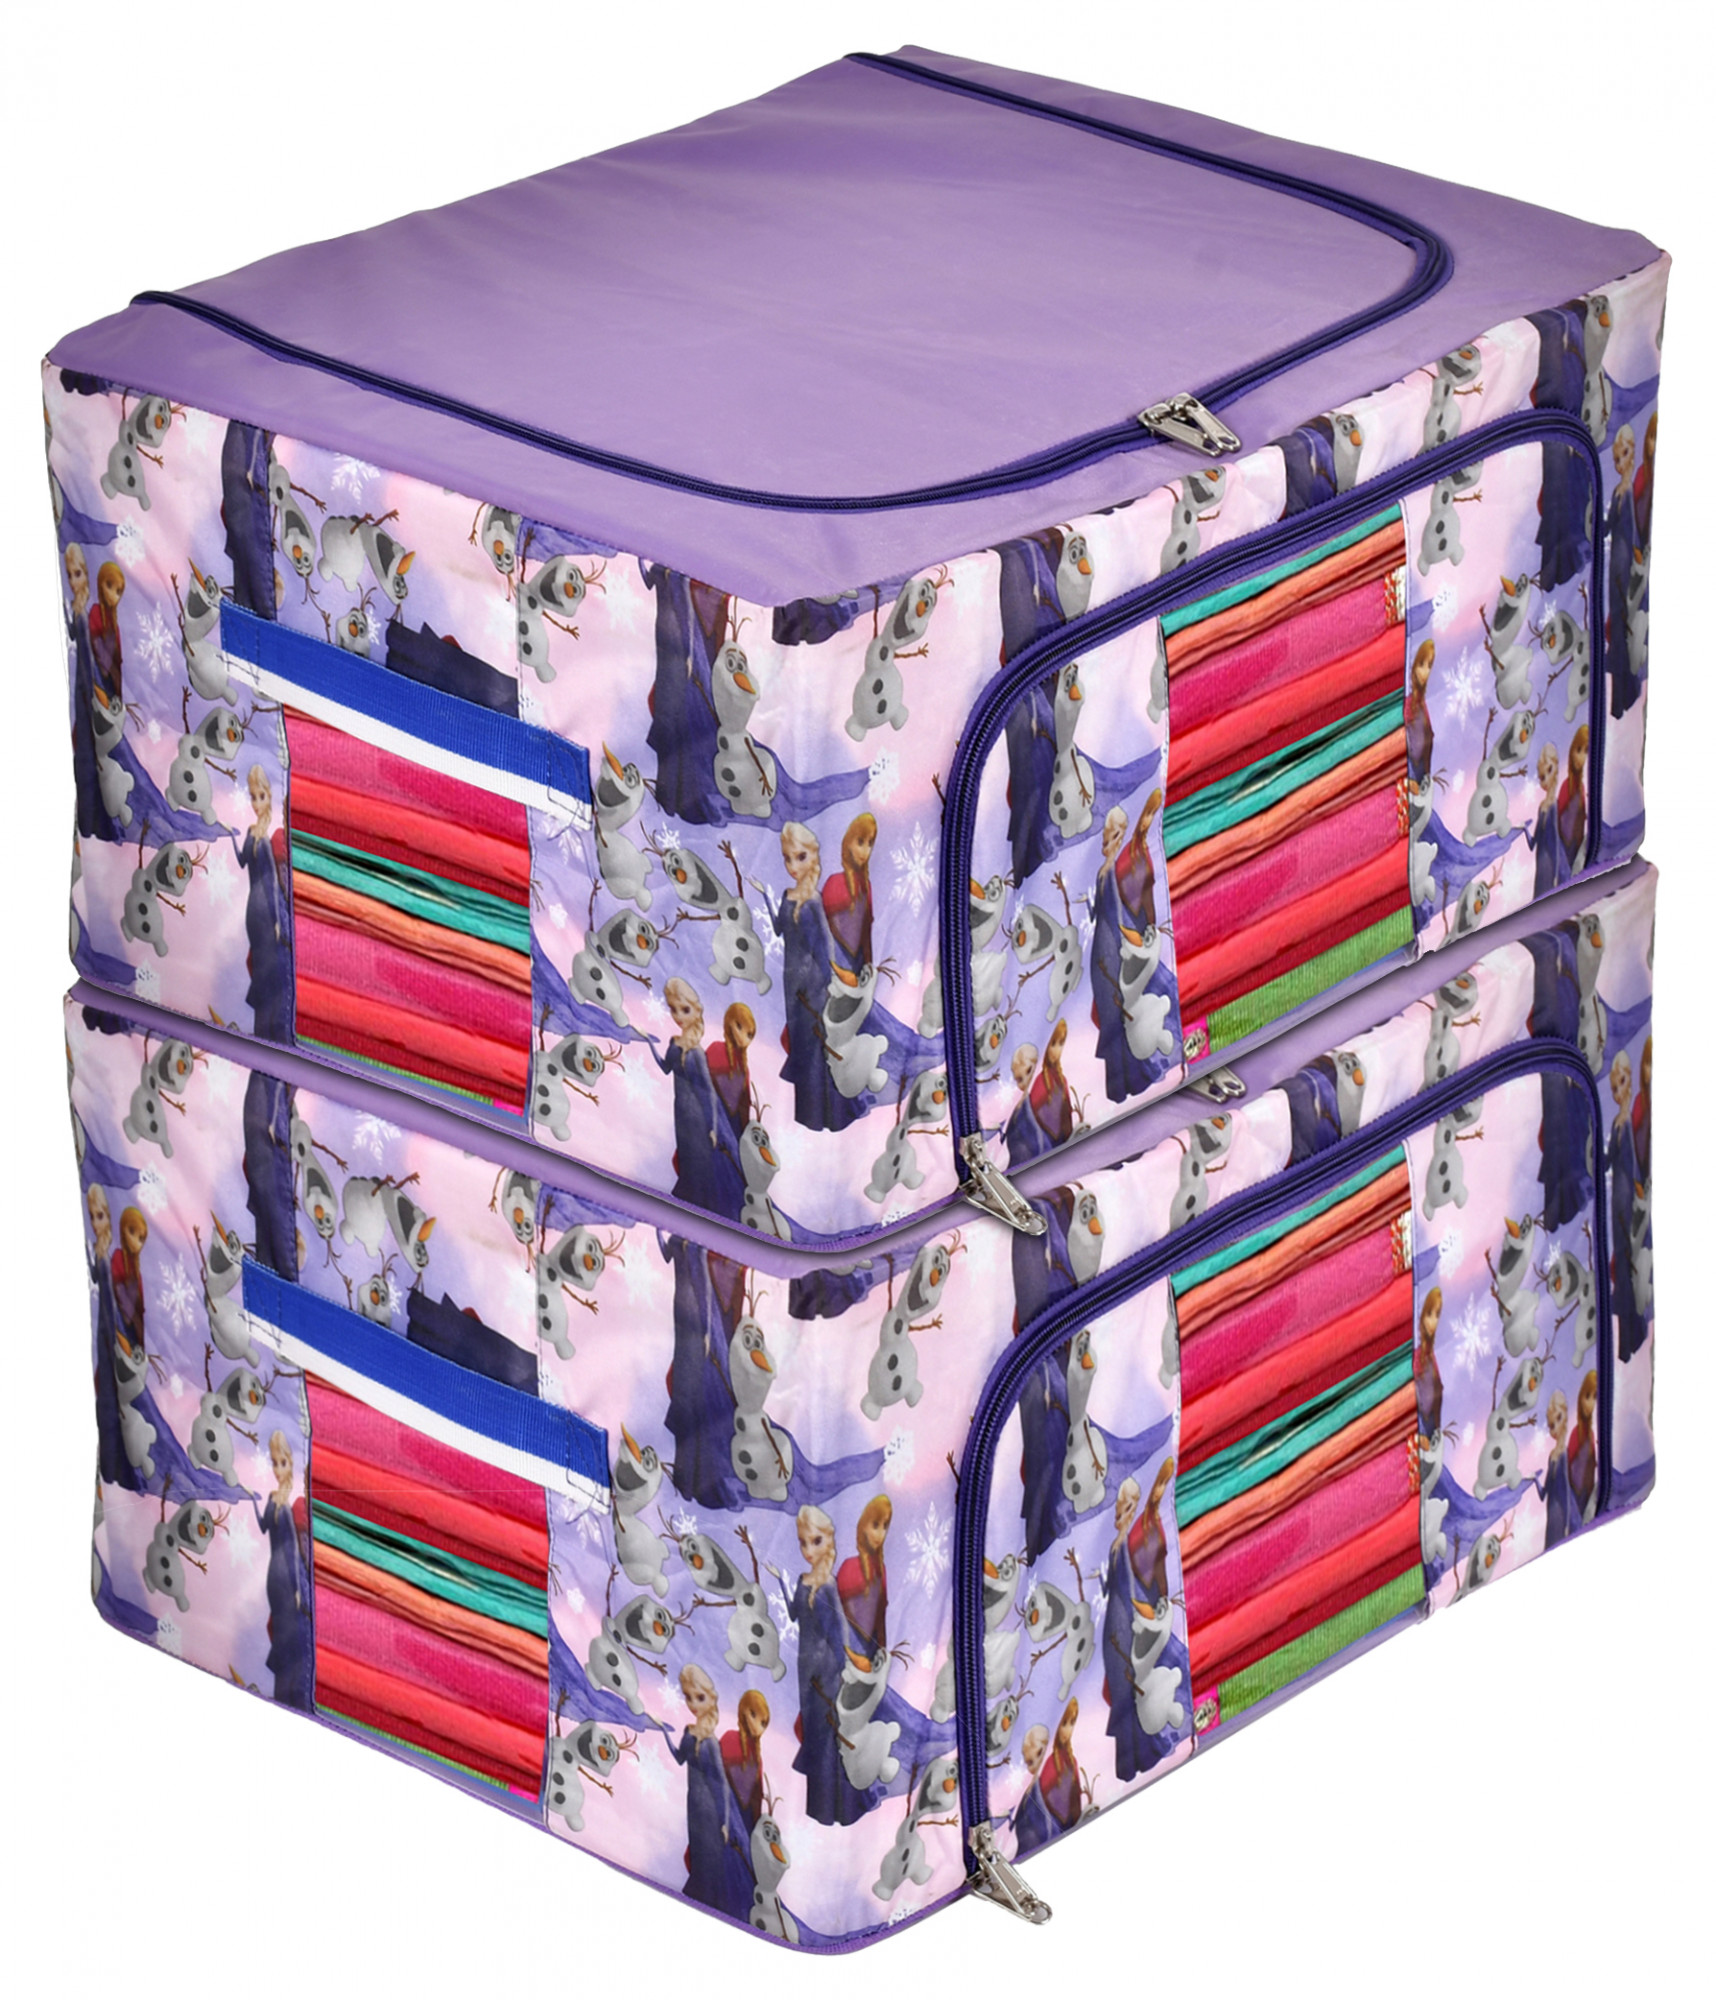 Kuber Industries Cartoon Printed Steel Frame Storage Box/Organizer For Clothing, Blankets, Bedding With Clear Window, 88Ltr. (Purple)-44KM0277